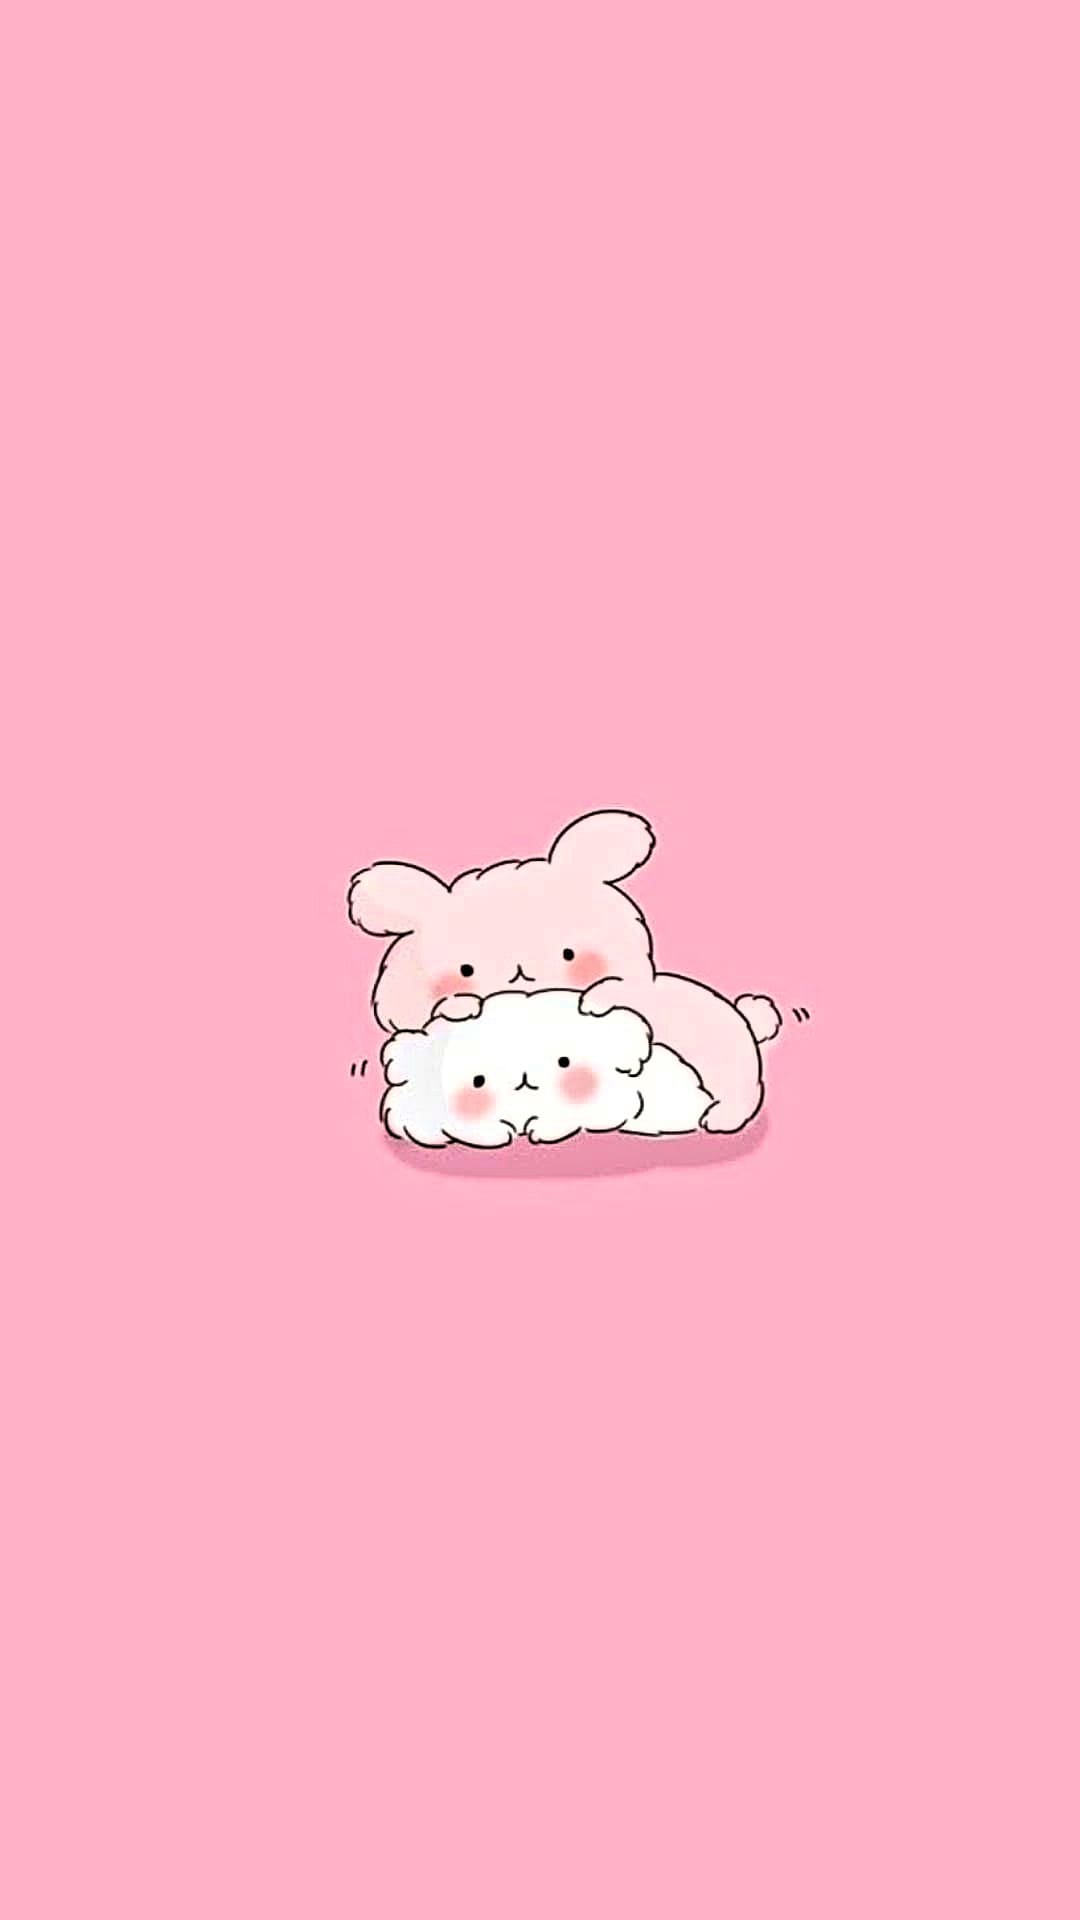 IPhone wallpaper of two pink bunny rabbits on a pink background - Kawaii